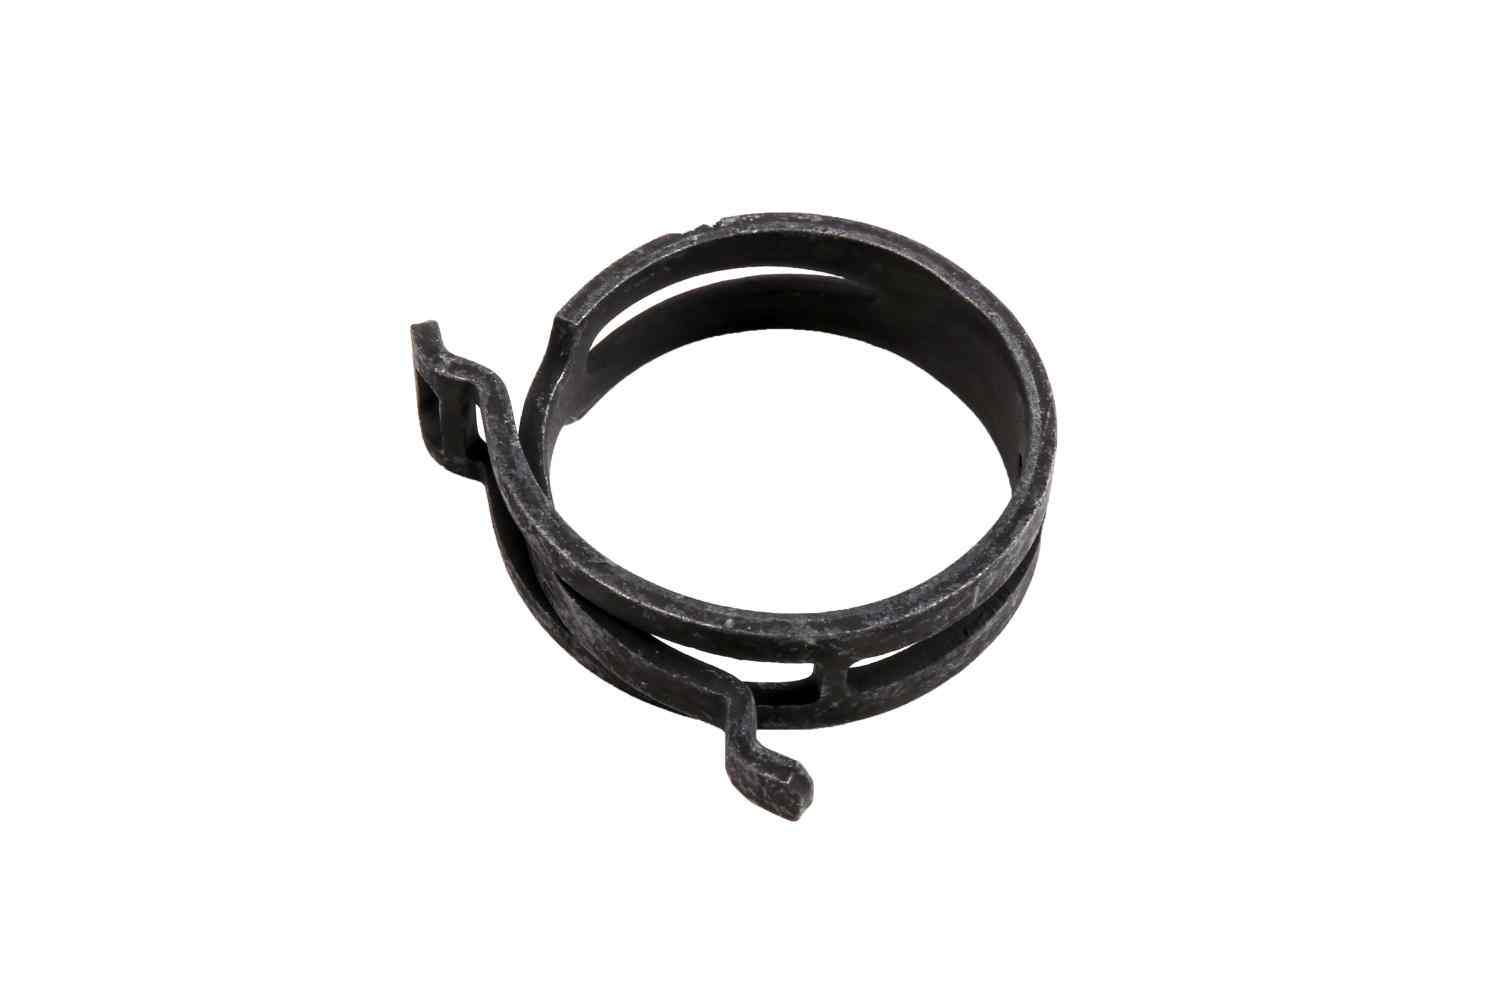 GM GENUINE PARTS CANADA - Radiator Surge Tank Outlet Hose Clamp - GMC 13162312